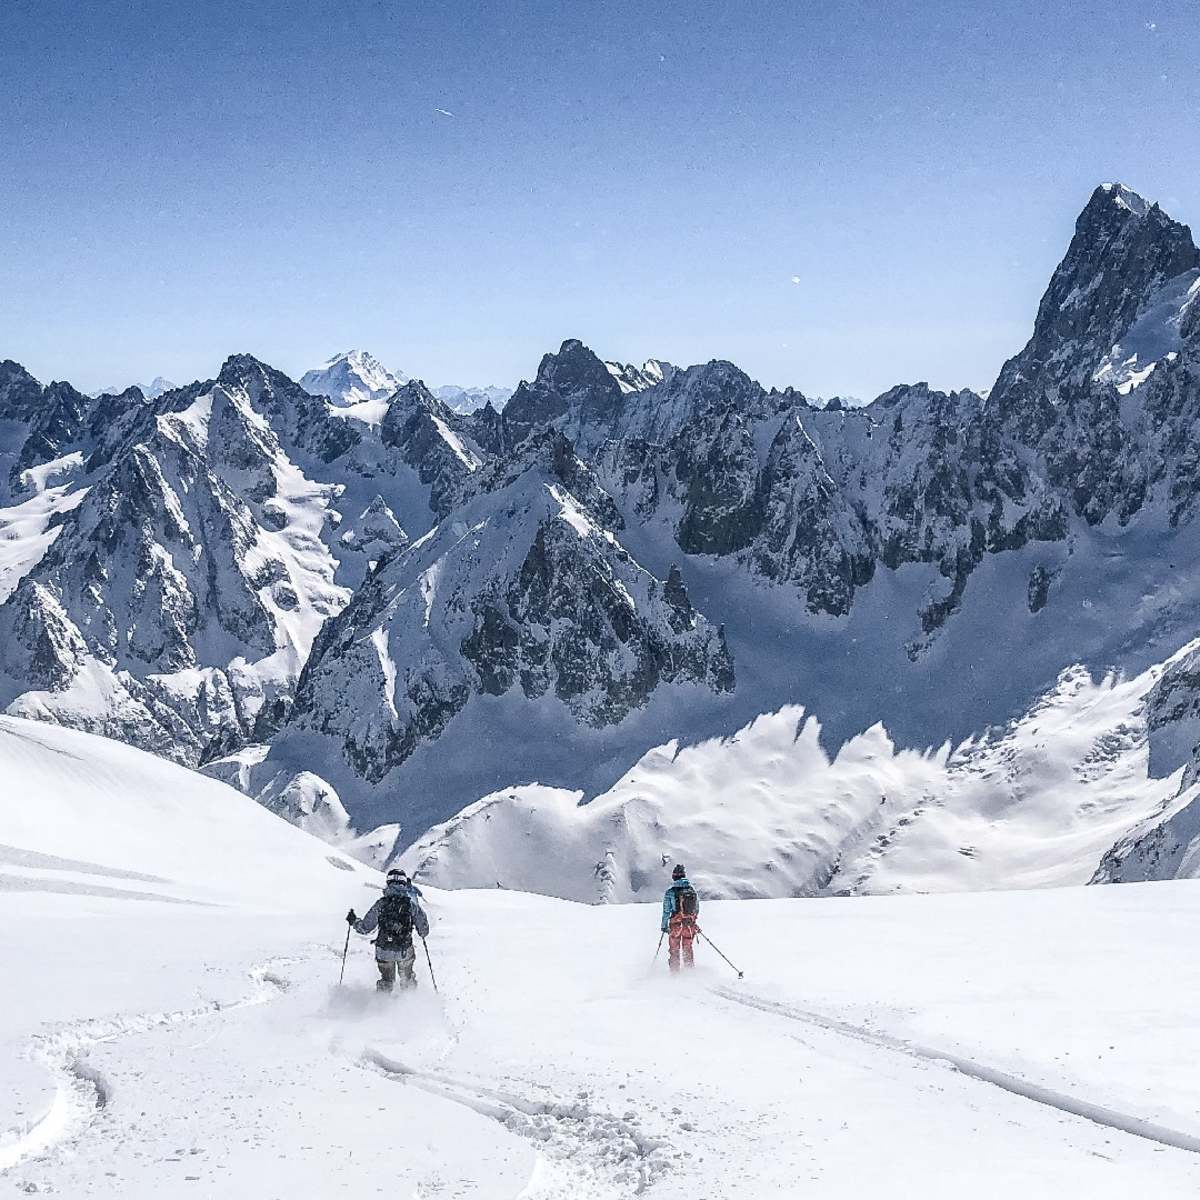 Off-Piste skiing Chamonix from the Aiguille du Midi and in the